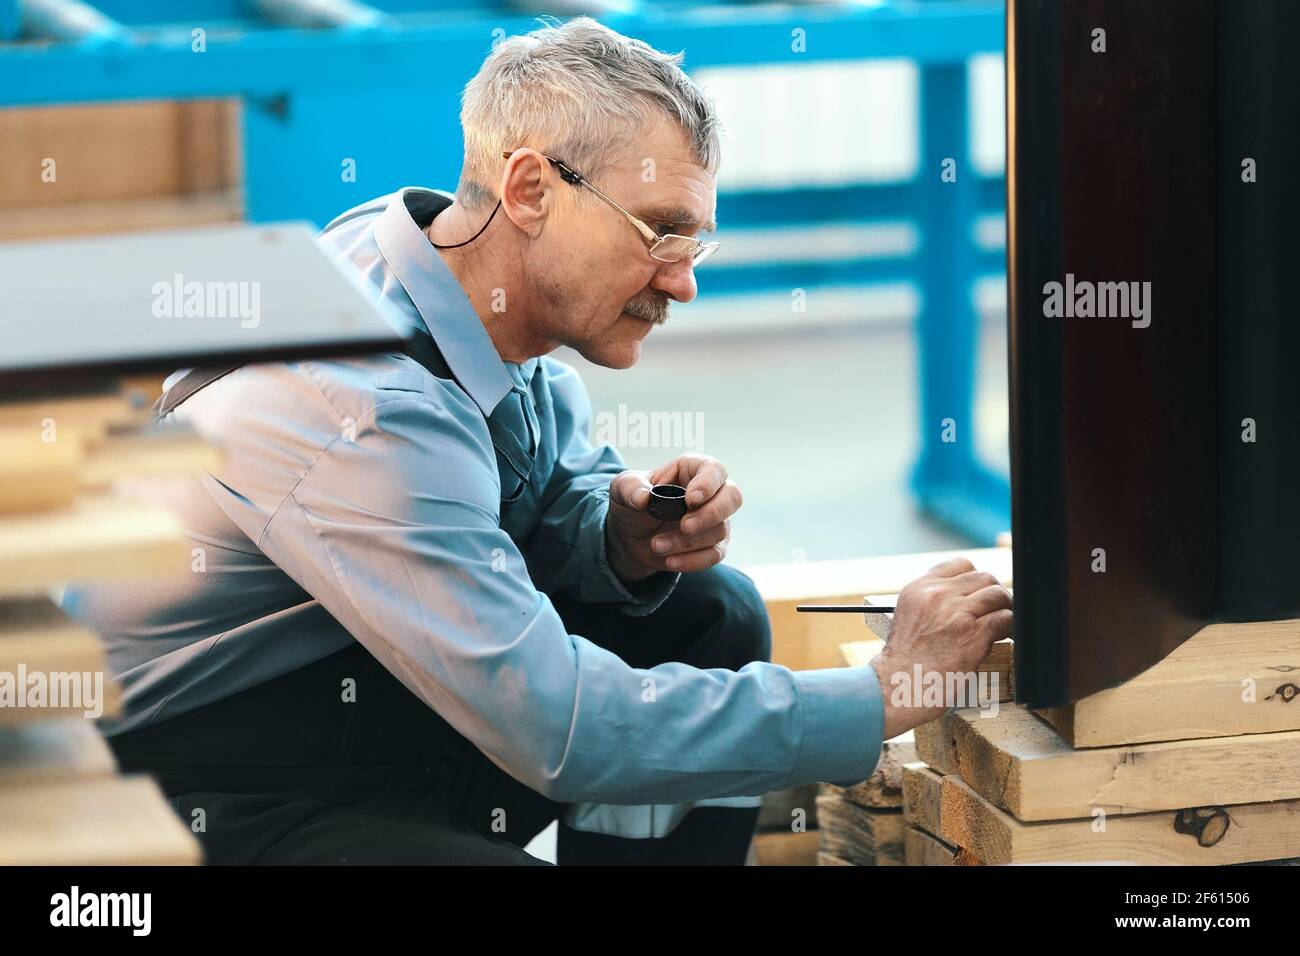 An elderly worker carefully restores furniture in a carpenter's workshop during the day. Stock Photo